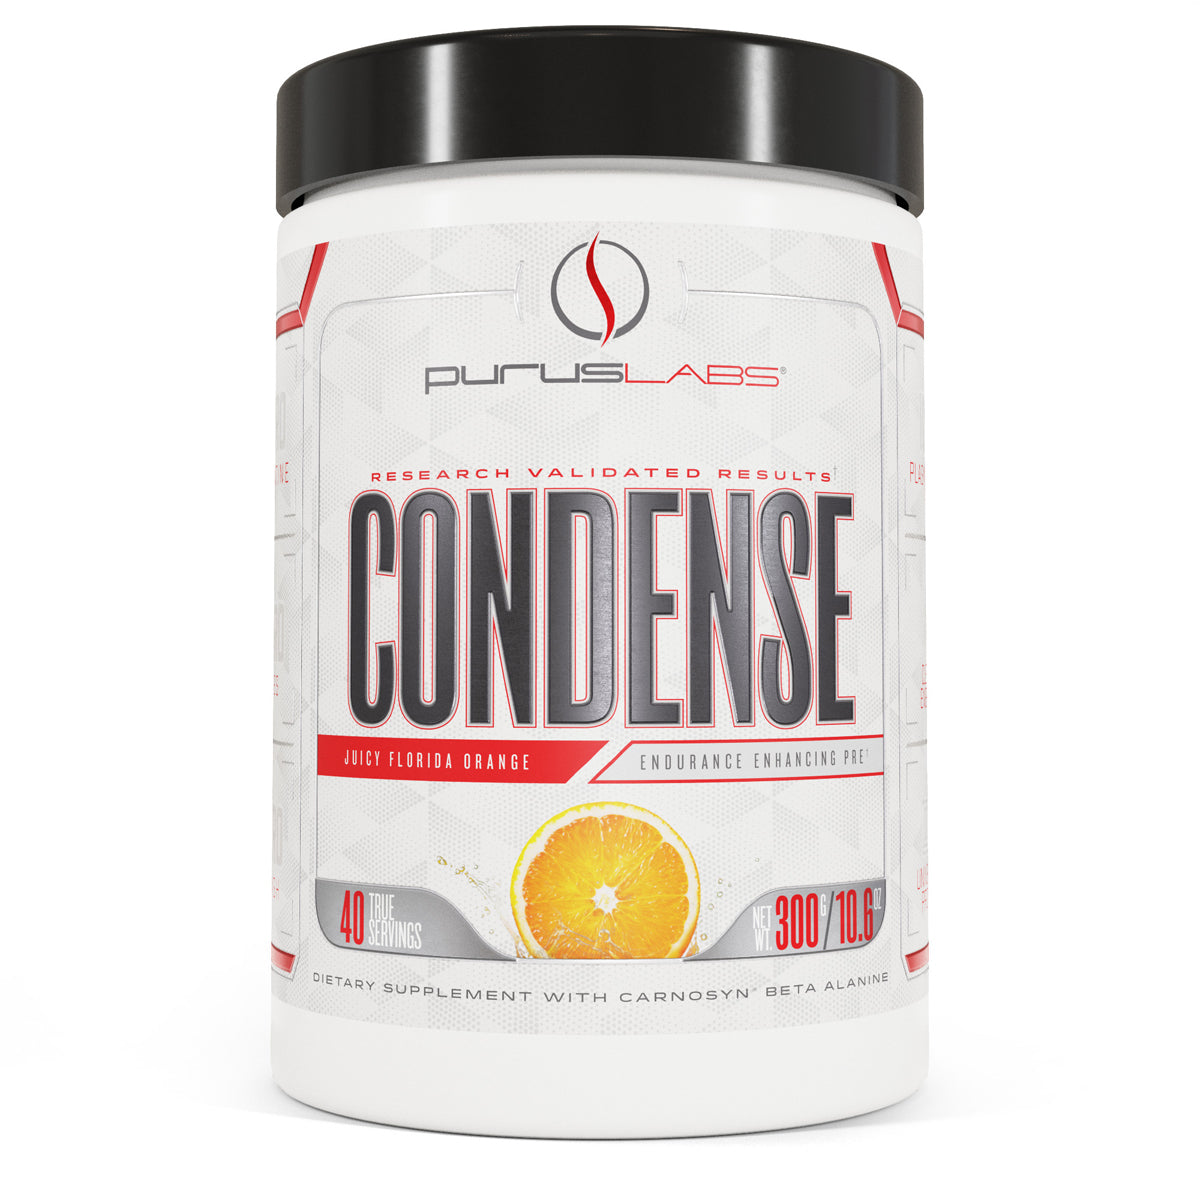 Purus Labs ConDense Pre Workout Dietary Supplement in Juicy Florida Orange from the front view